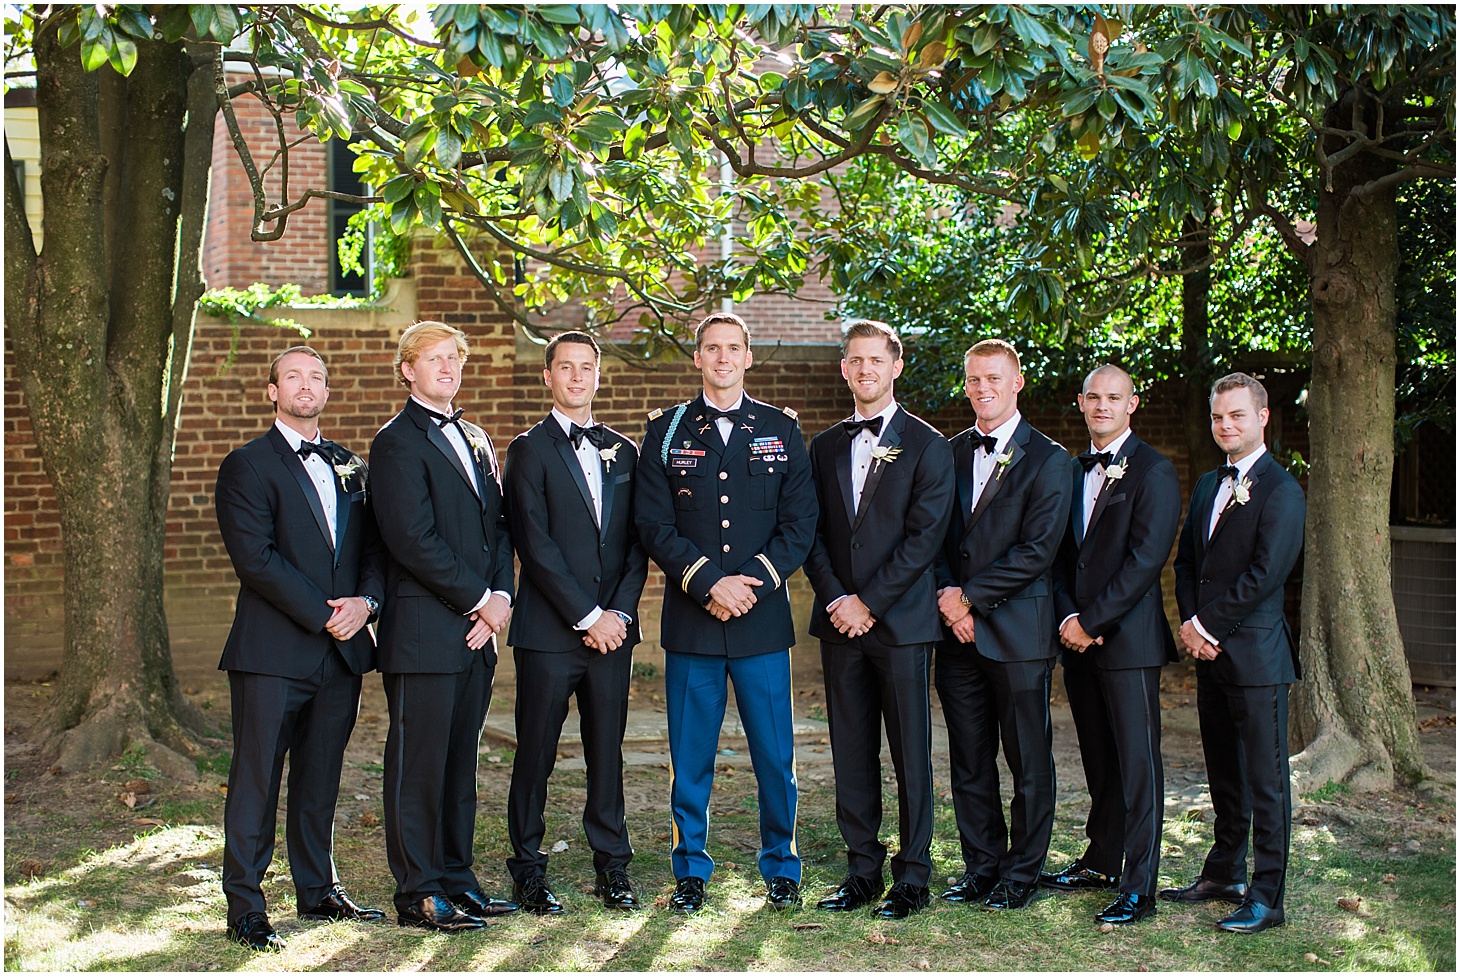 Groom and Groomsmen at Old Presbyterian Meeting House | Southern Black Tie wedding at St. Regis DC in Dusty Blue and Ivory | Sarah Bradshaw Photography